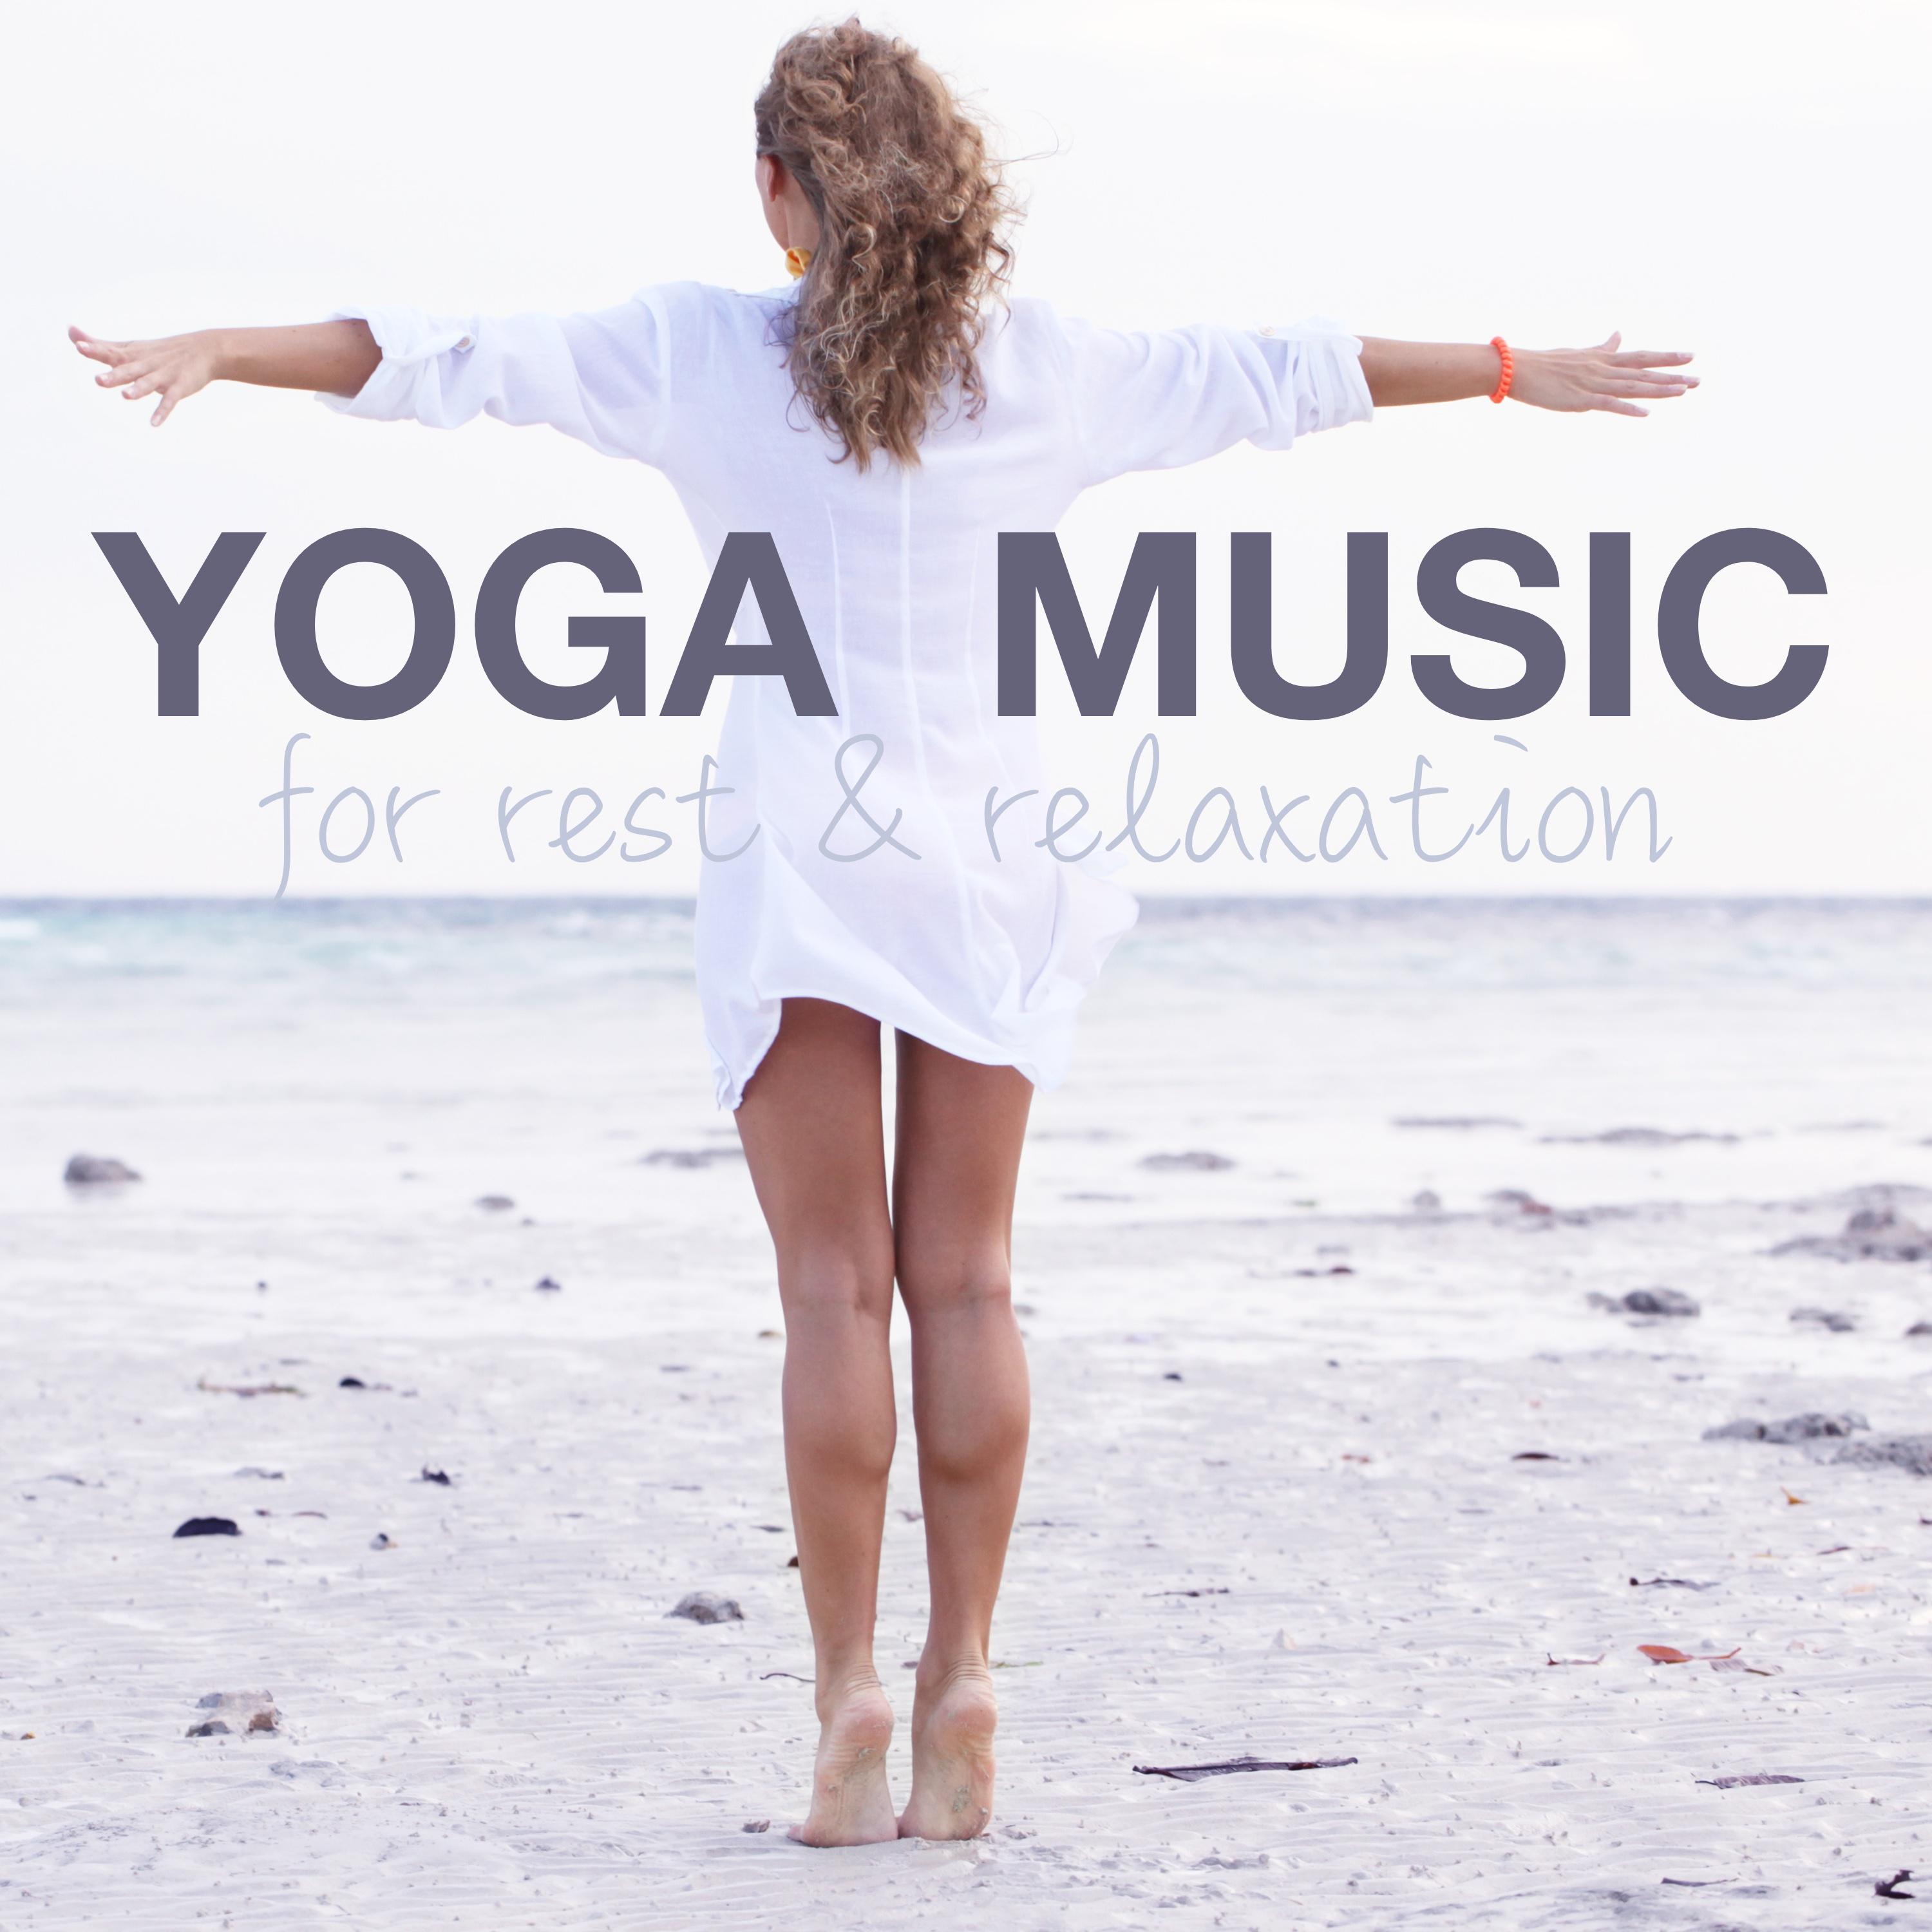 Yoga Music for Rest & Relaxation